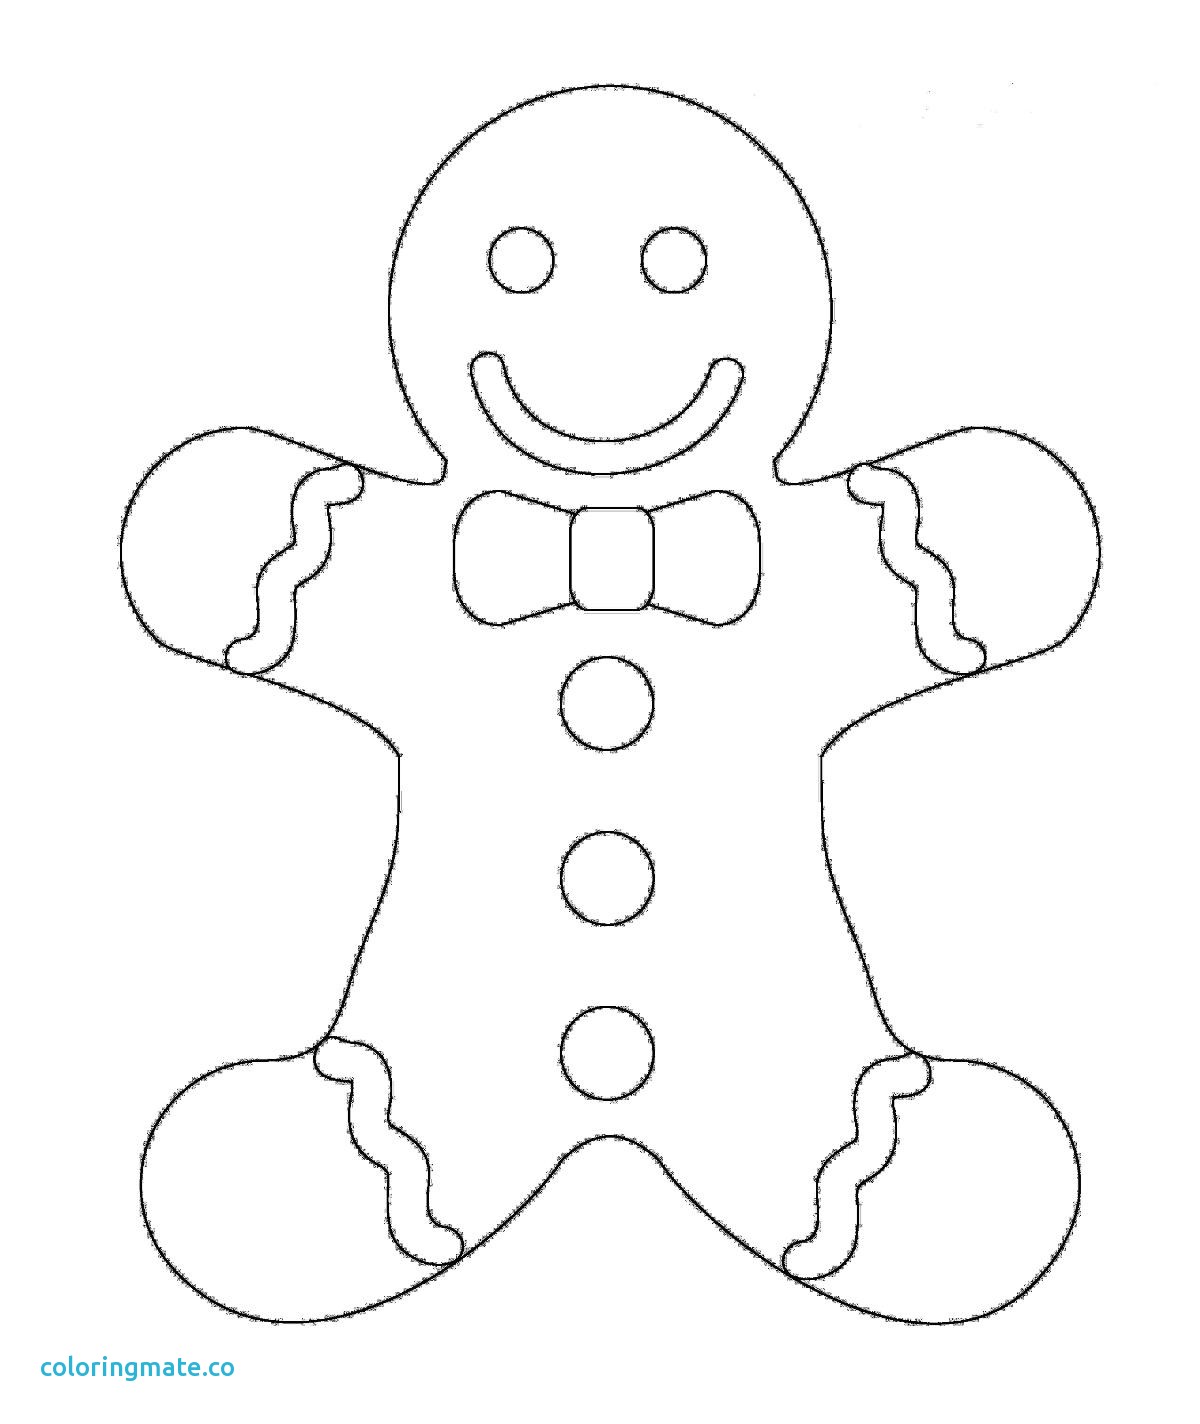 Gingerbread Family Coloring Pages at Free printable